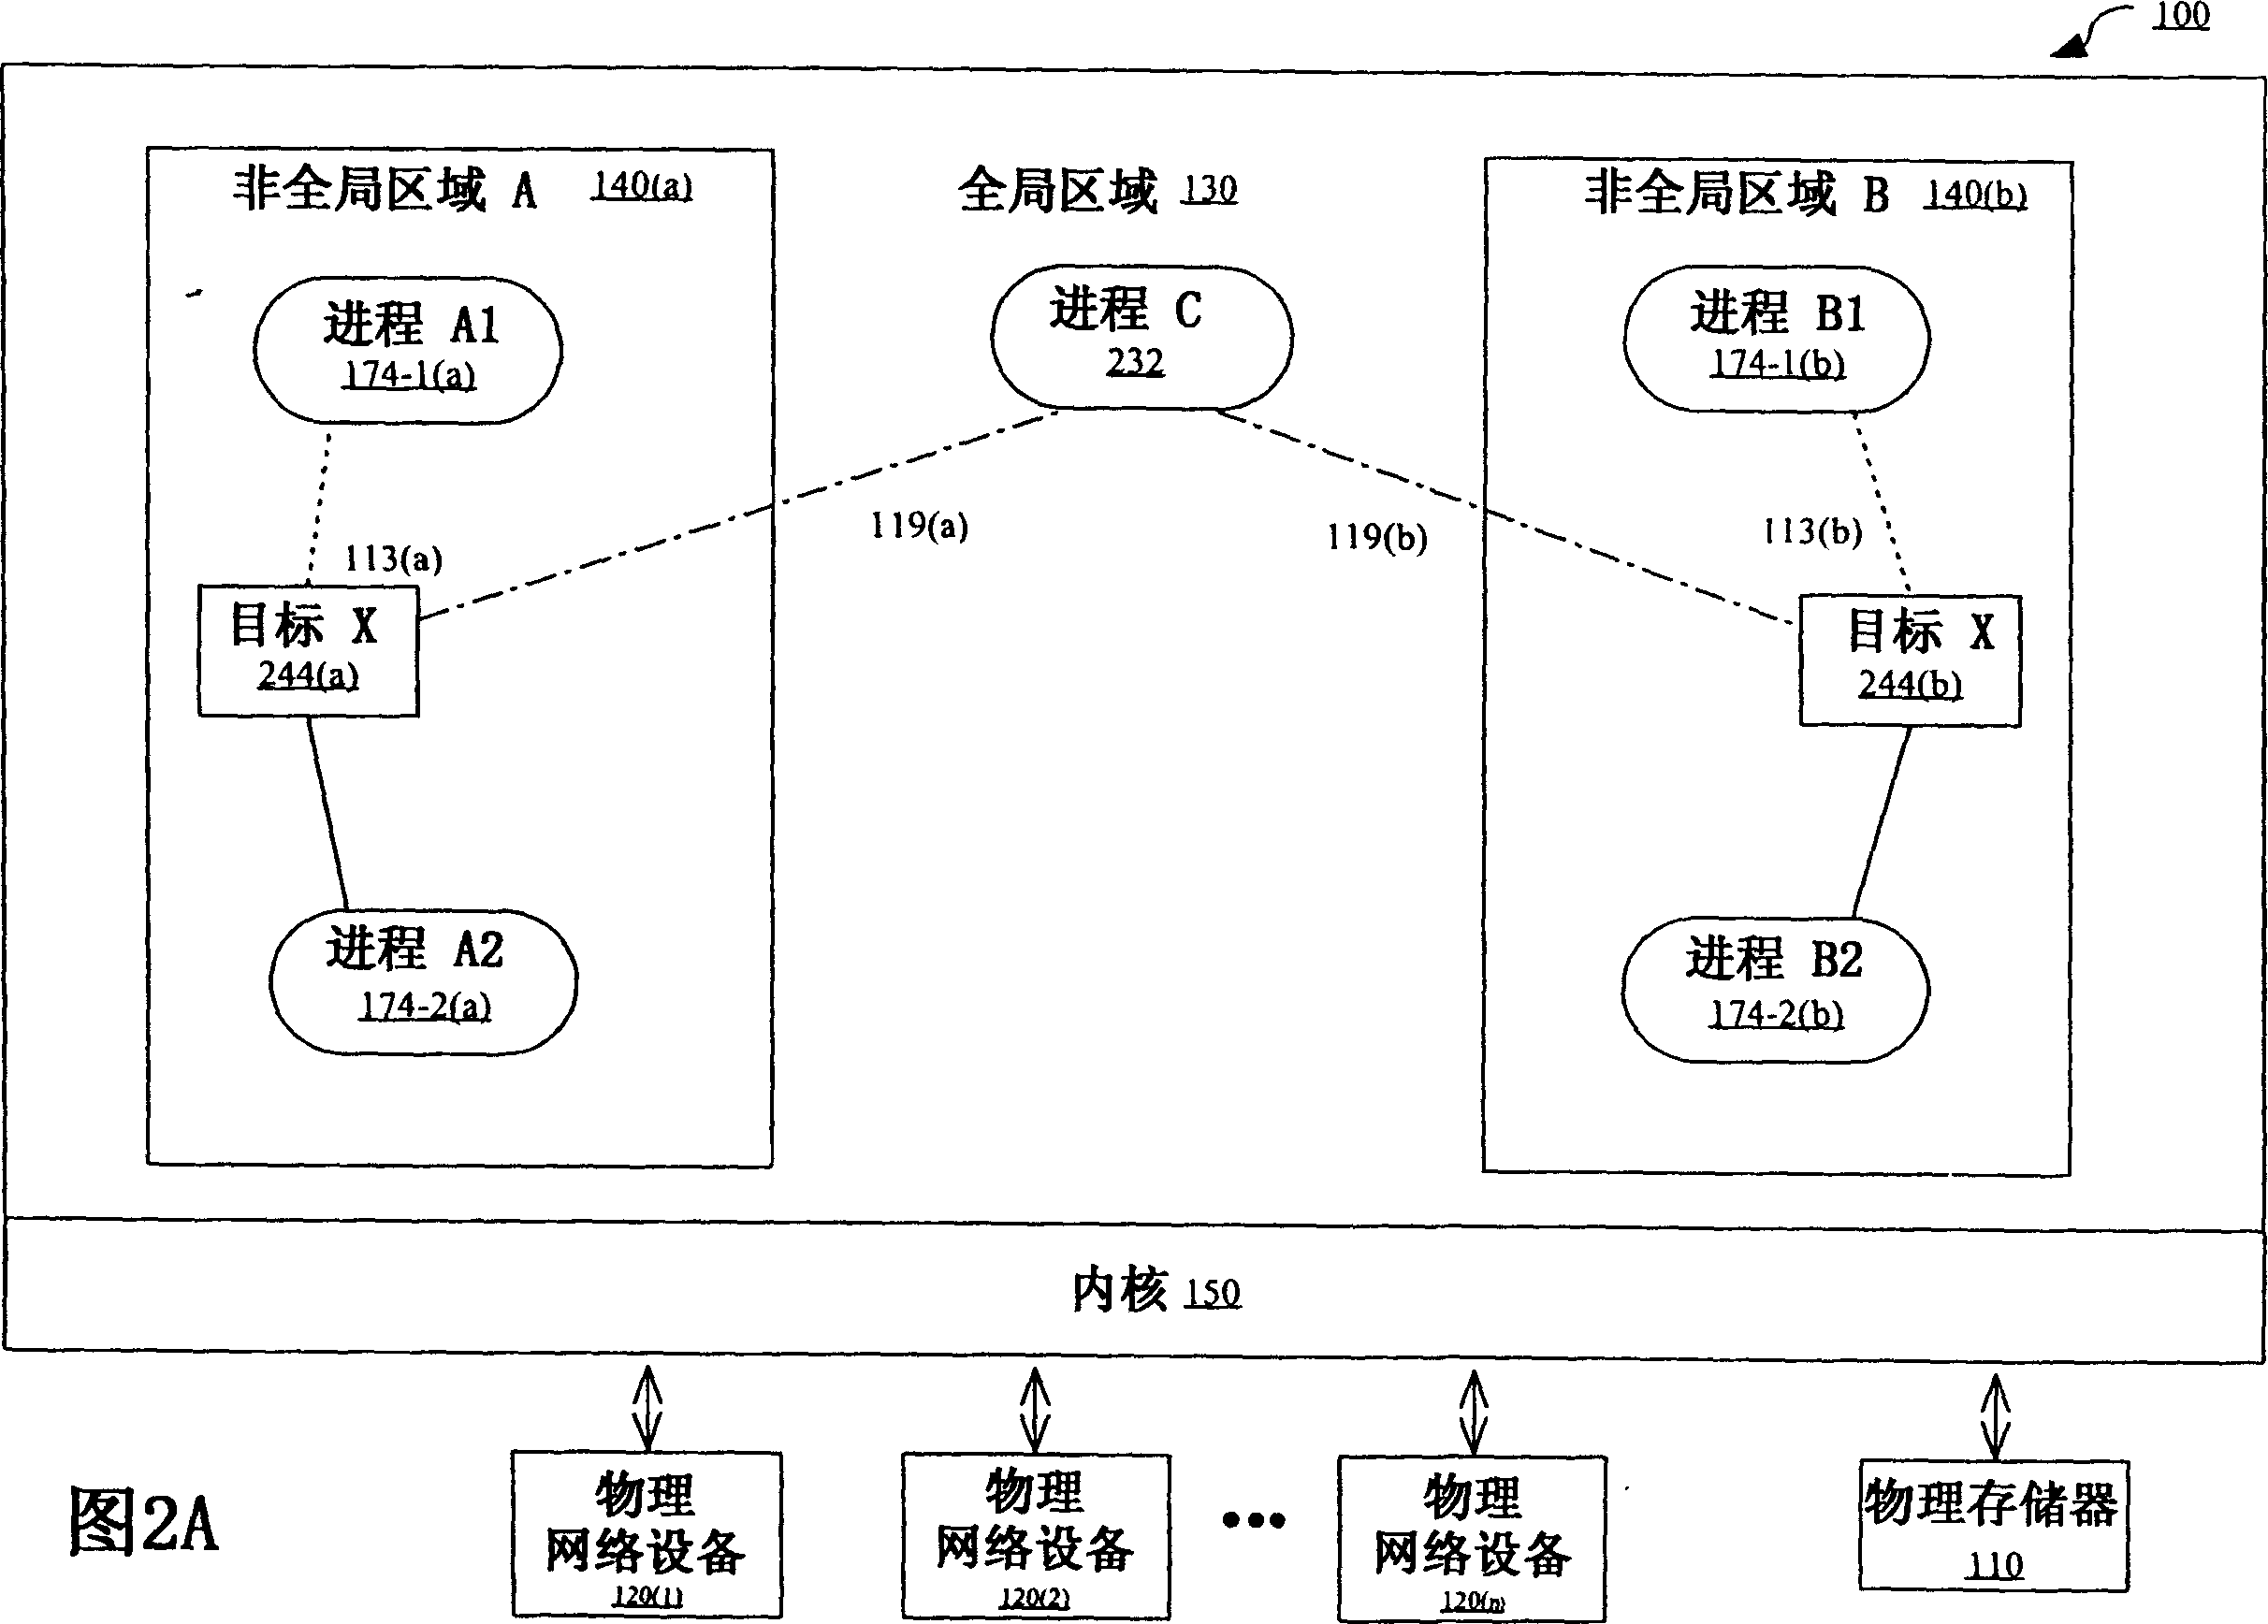 Interprocess communication in operating system partition